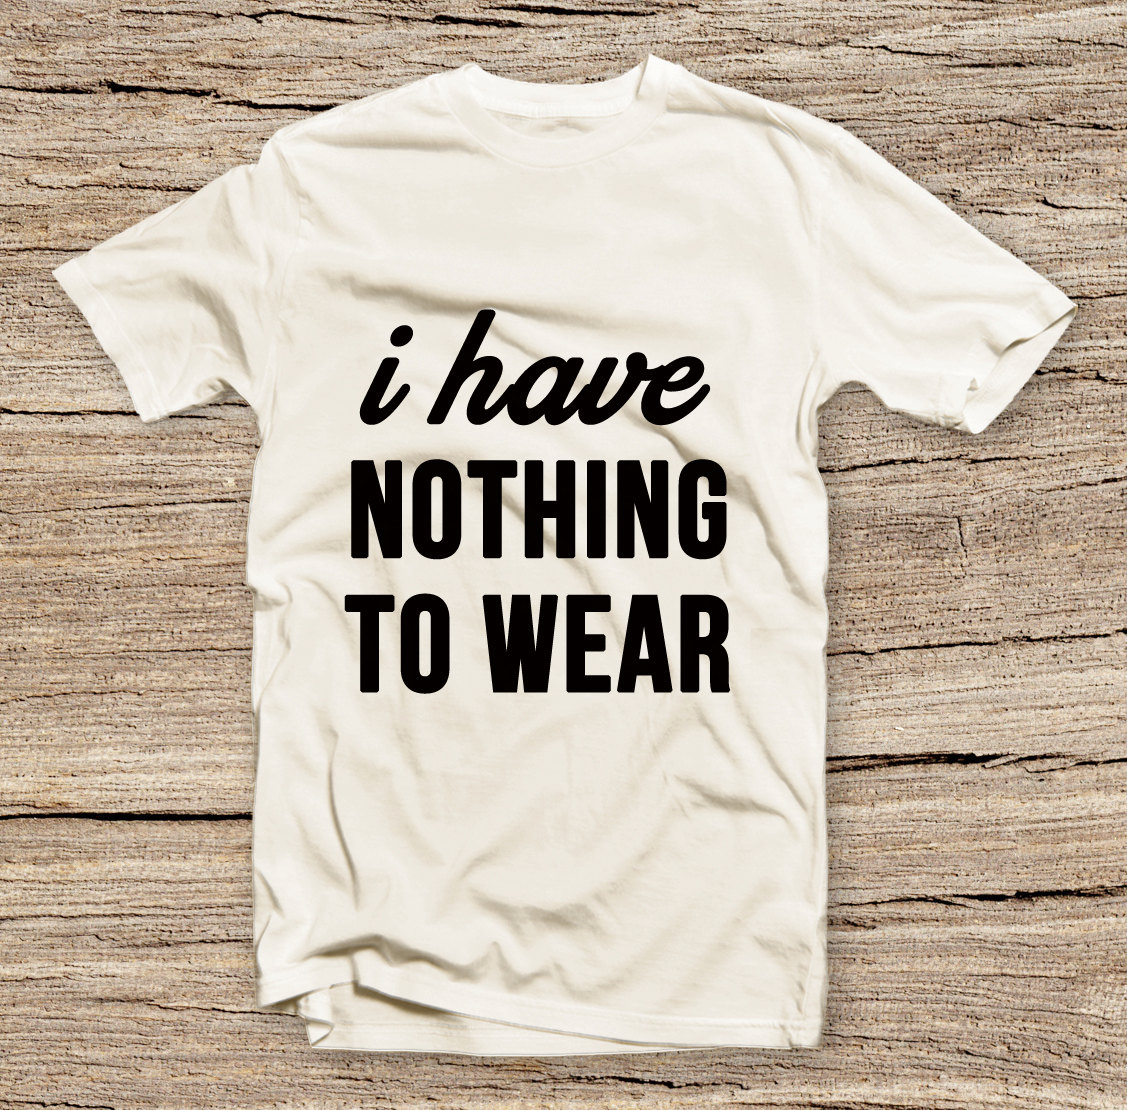 Pts-134 I Have Nothing To Wear T-shirt, Fashion Shirts, Funny T-shirt, Cute T-shirts, Cool T-shirts